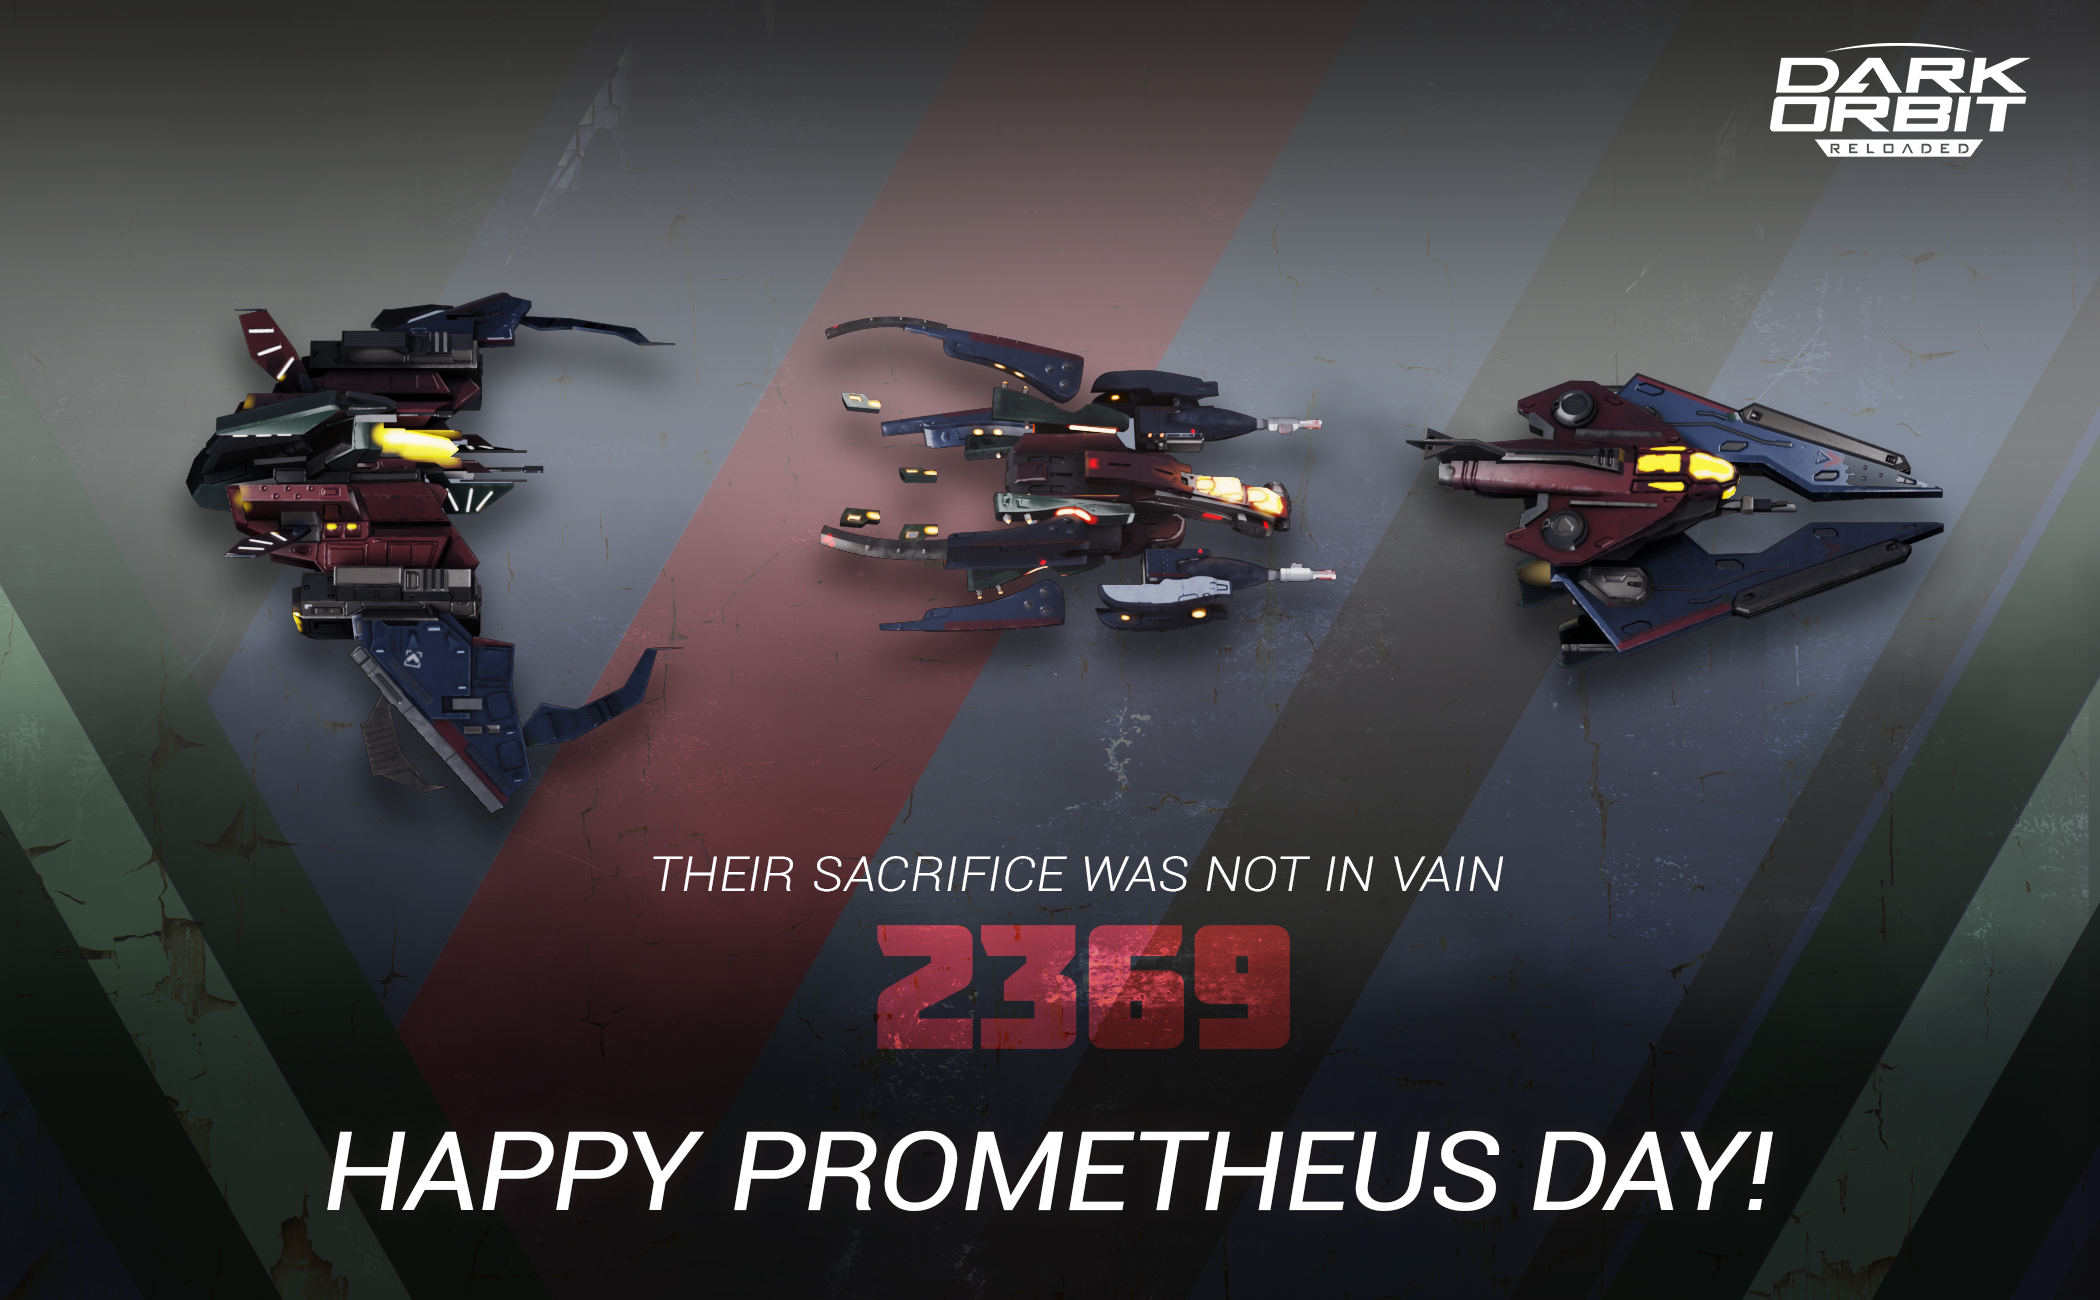 DarkOrbit on X: "+++ Days +++ out the Prometheus Ship available during Days! Handy hint: There's a chance to get Inferno Mimesis, Inferno Hammerclaw and Inferno Diminisher for